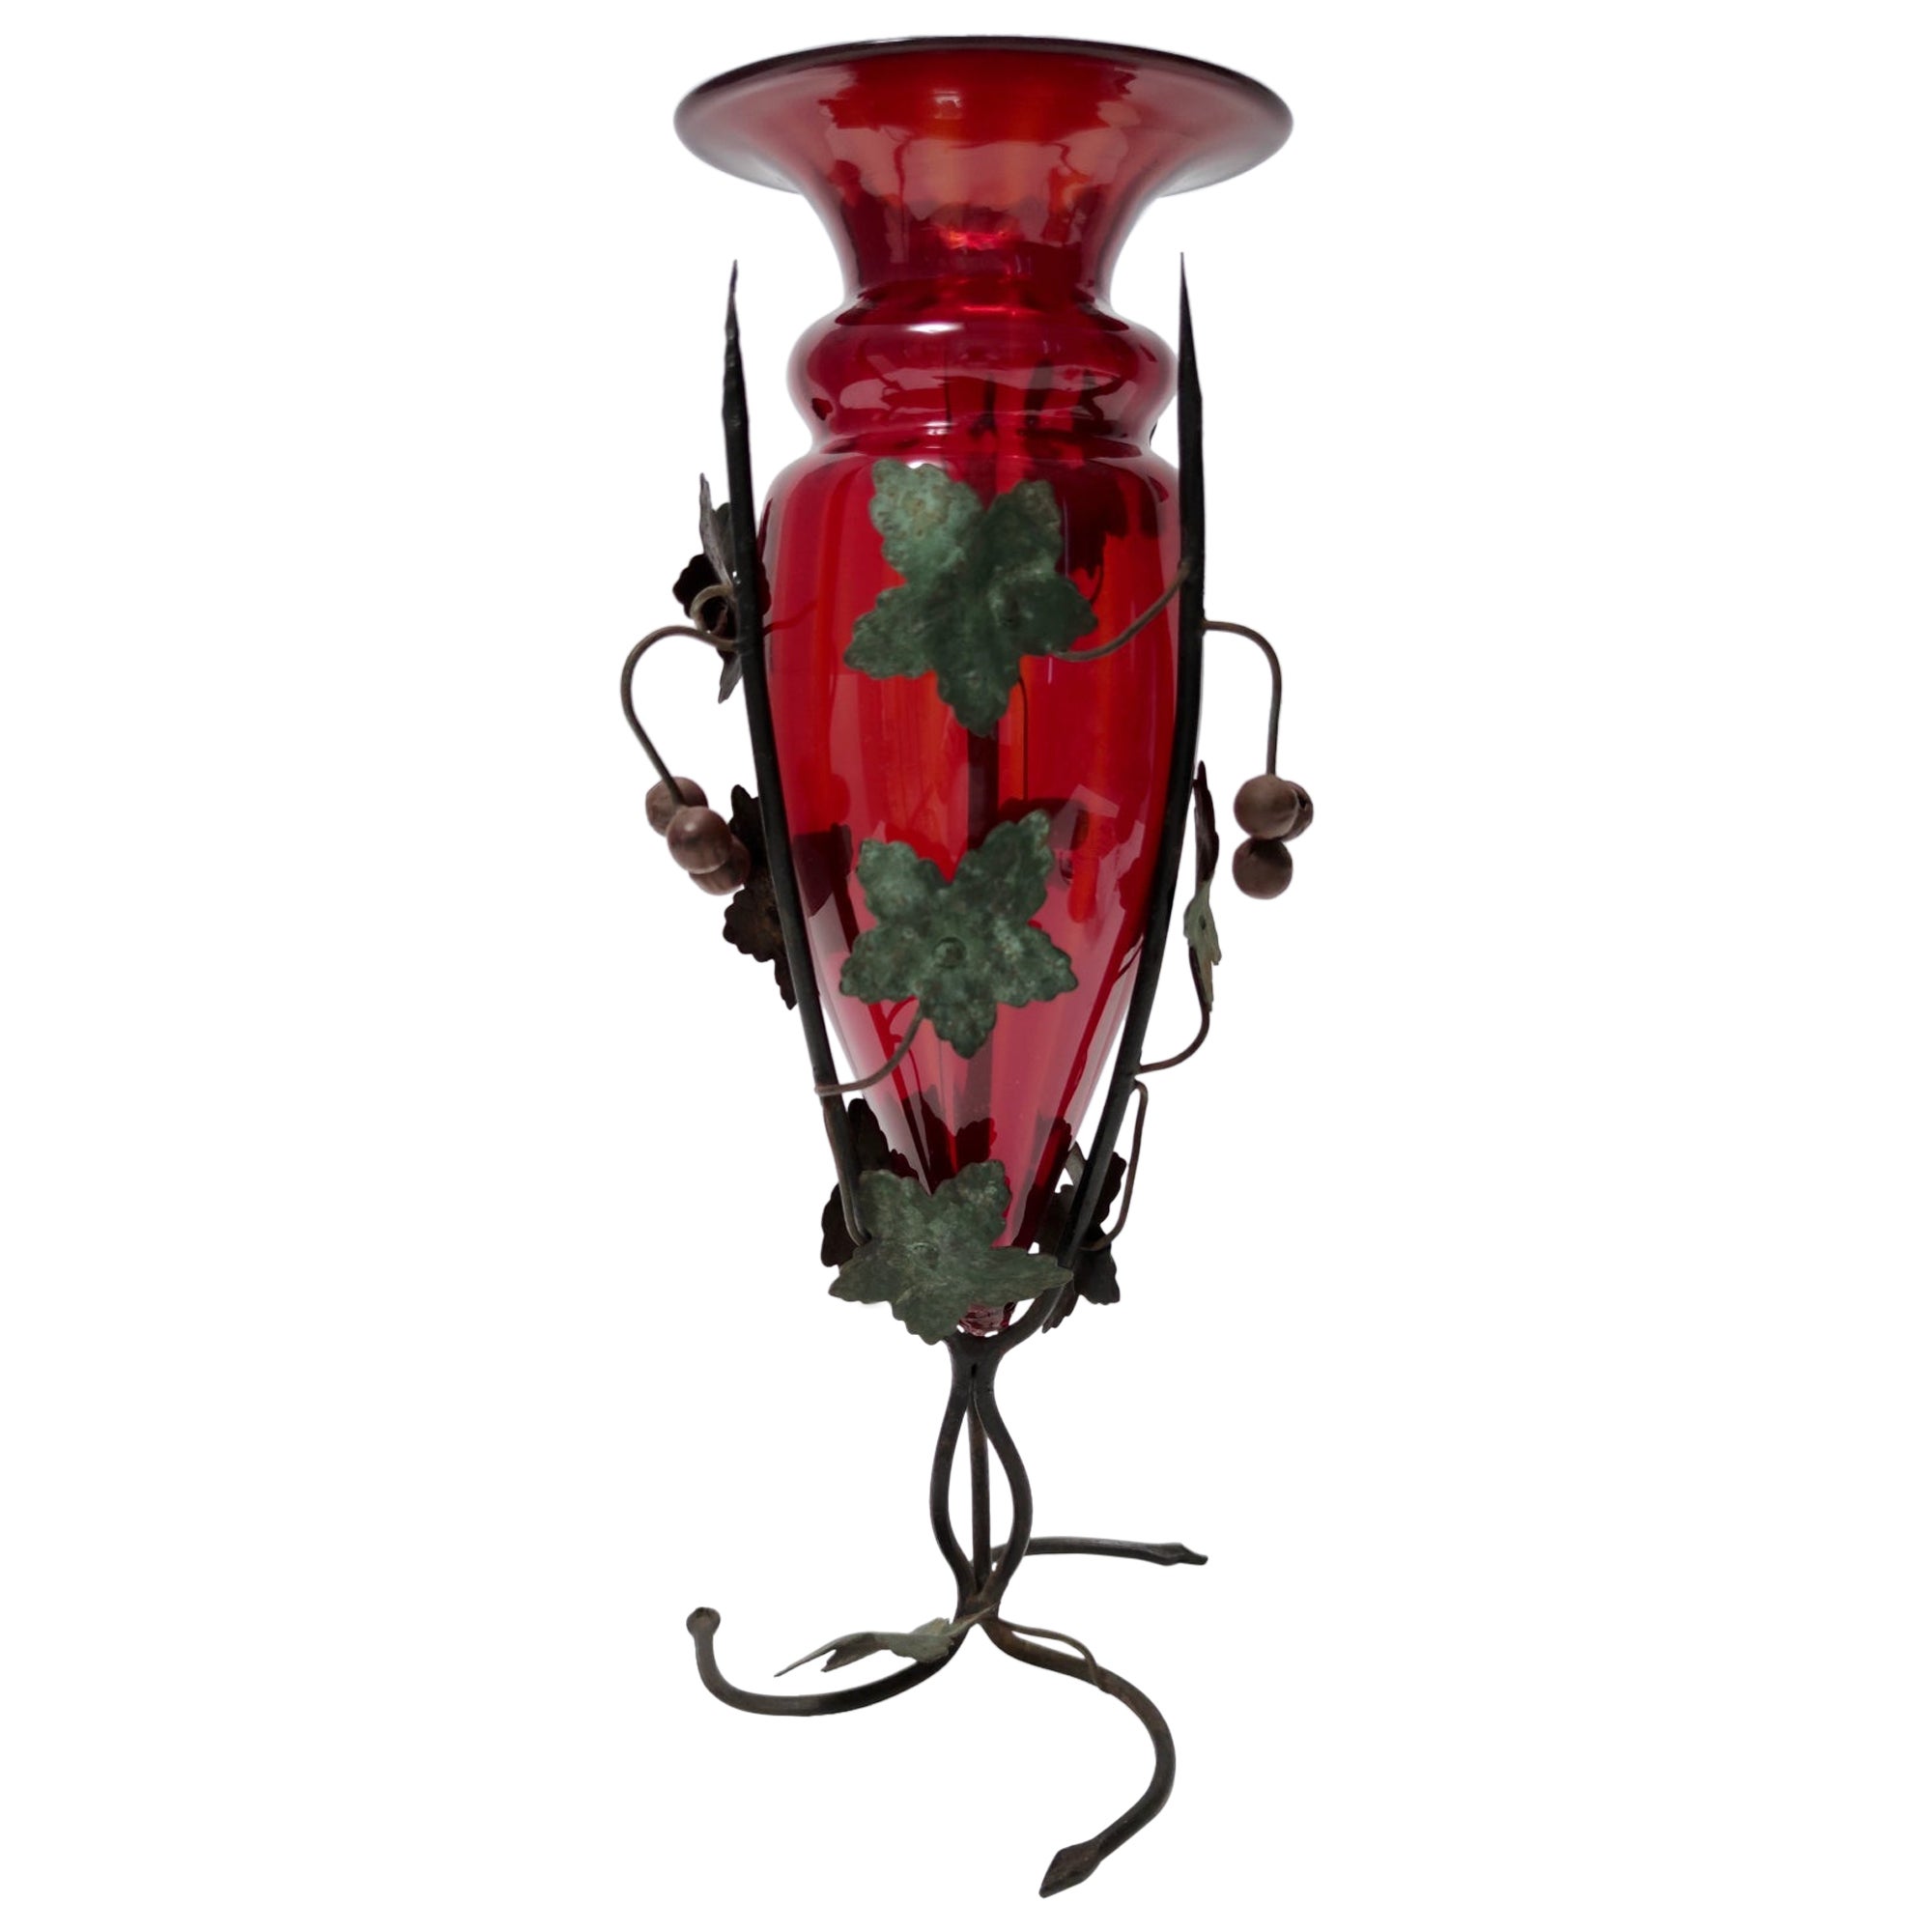 Ruby Red Murano Glass Vase with Iron Grape Vines Ascribable to Umberto Bellotto For Sale